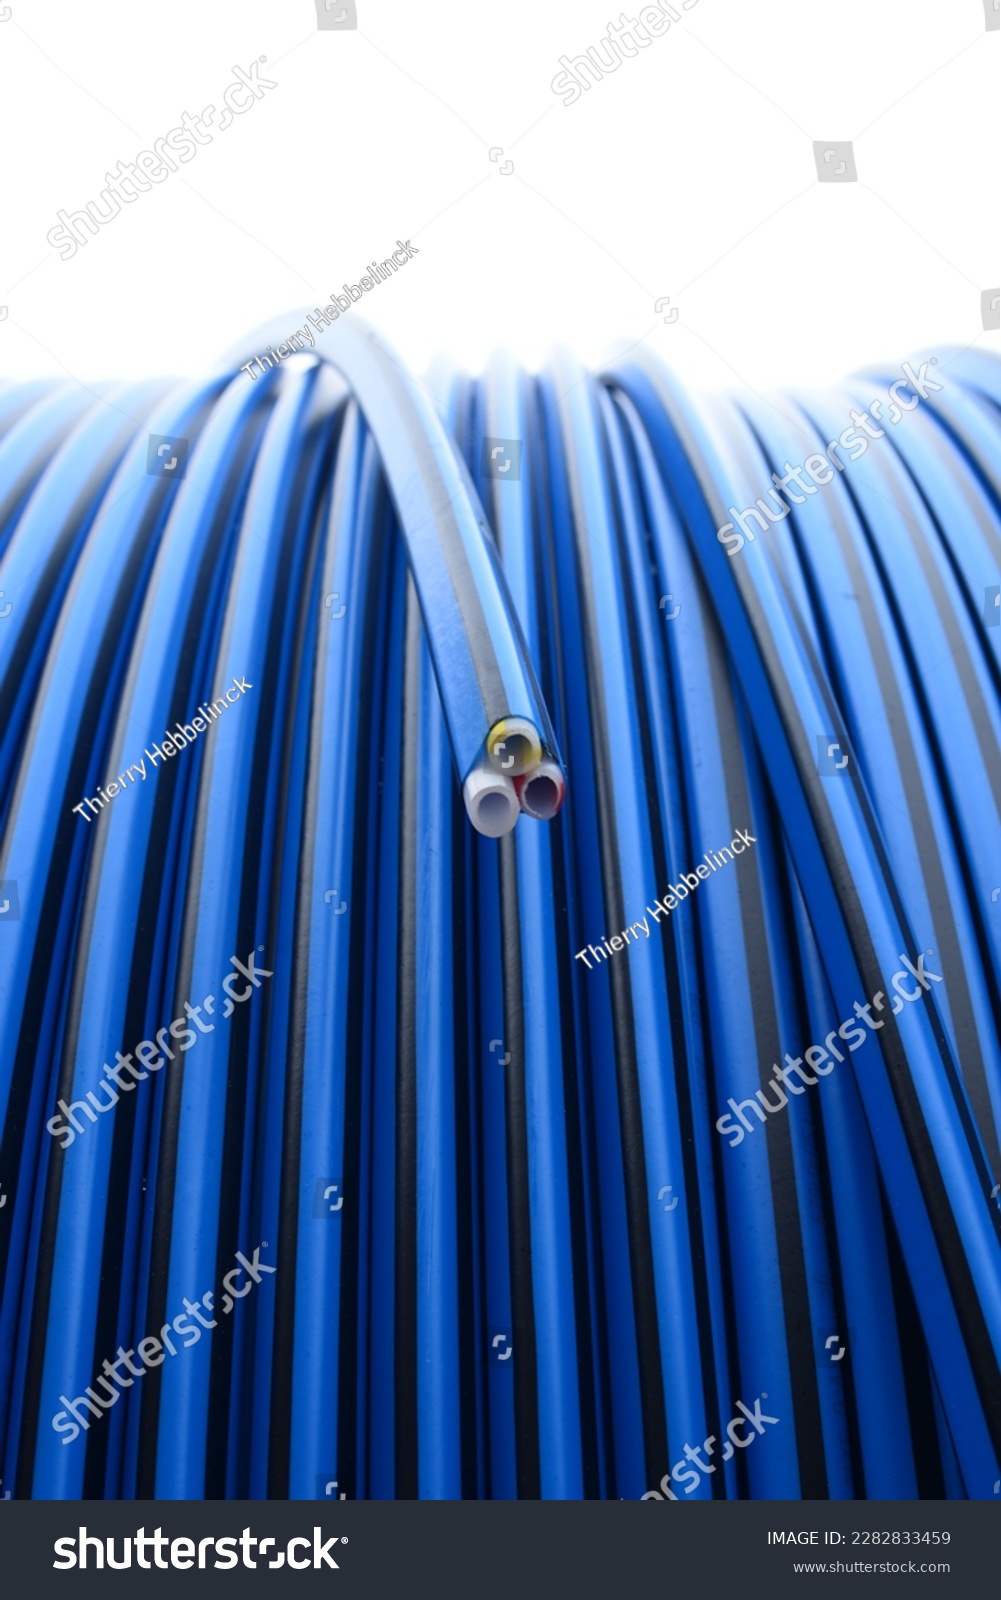 Close up on outdoor blue and black colored optical fiber tube coil with 3 tubes inside, blue, yellow and red striped #2282833459